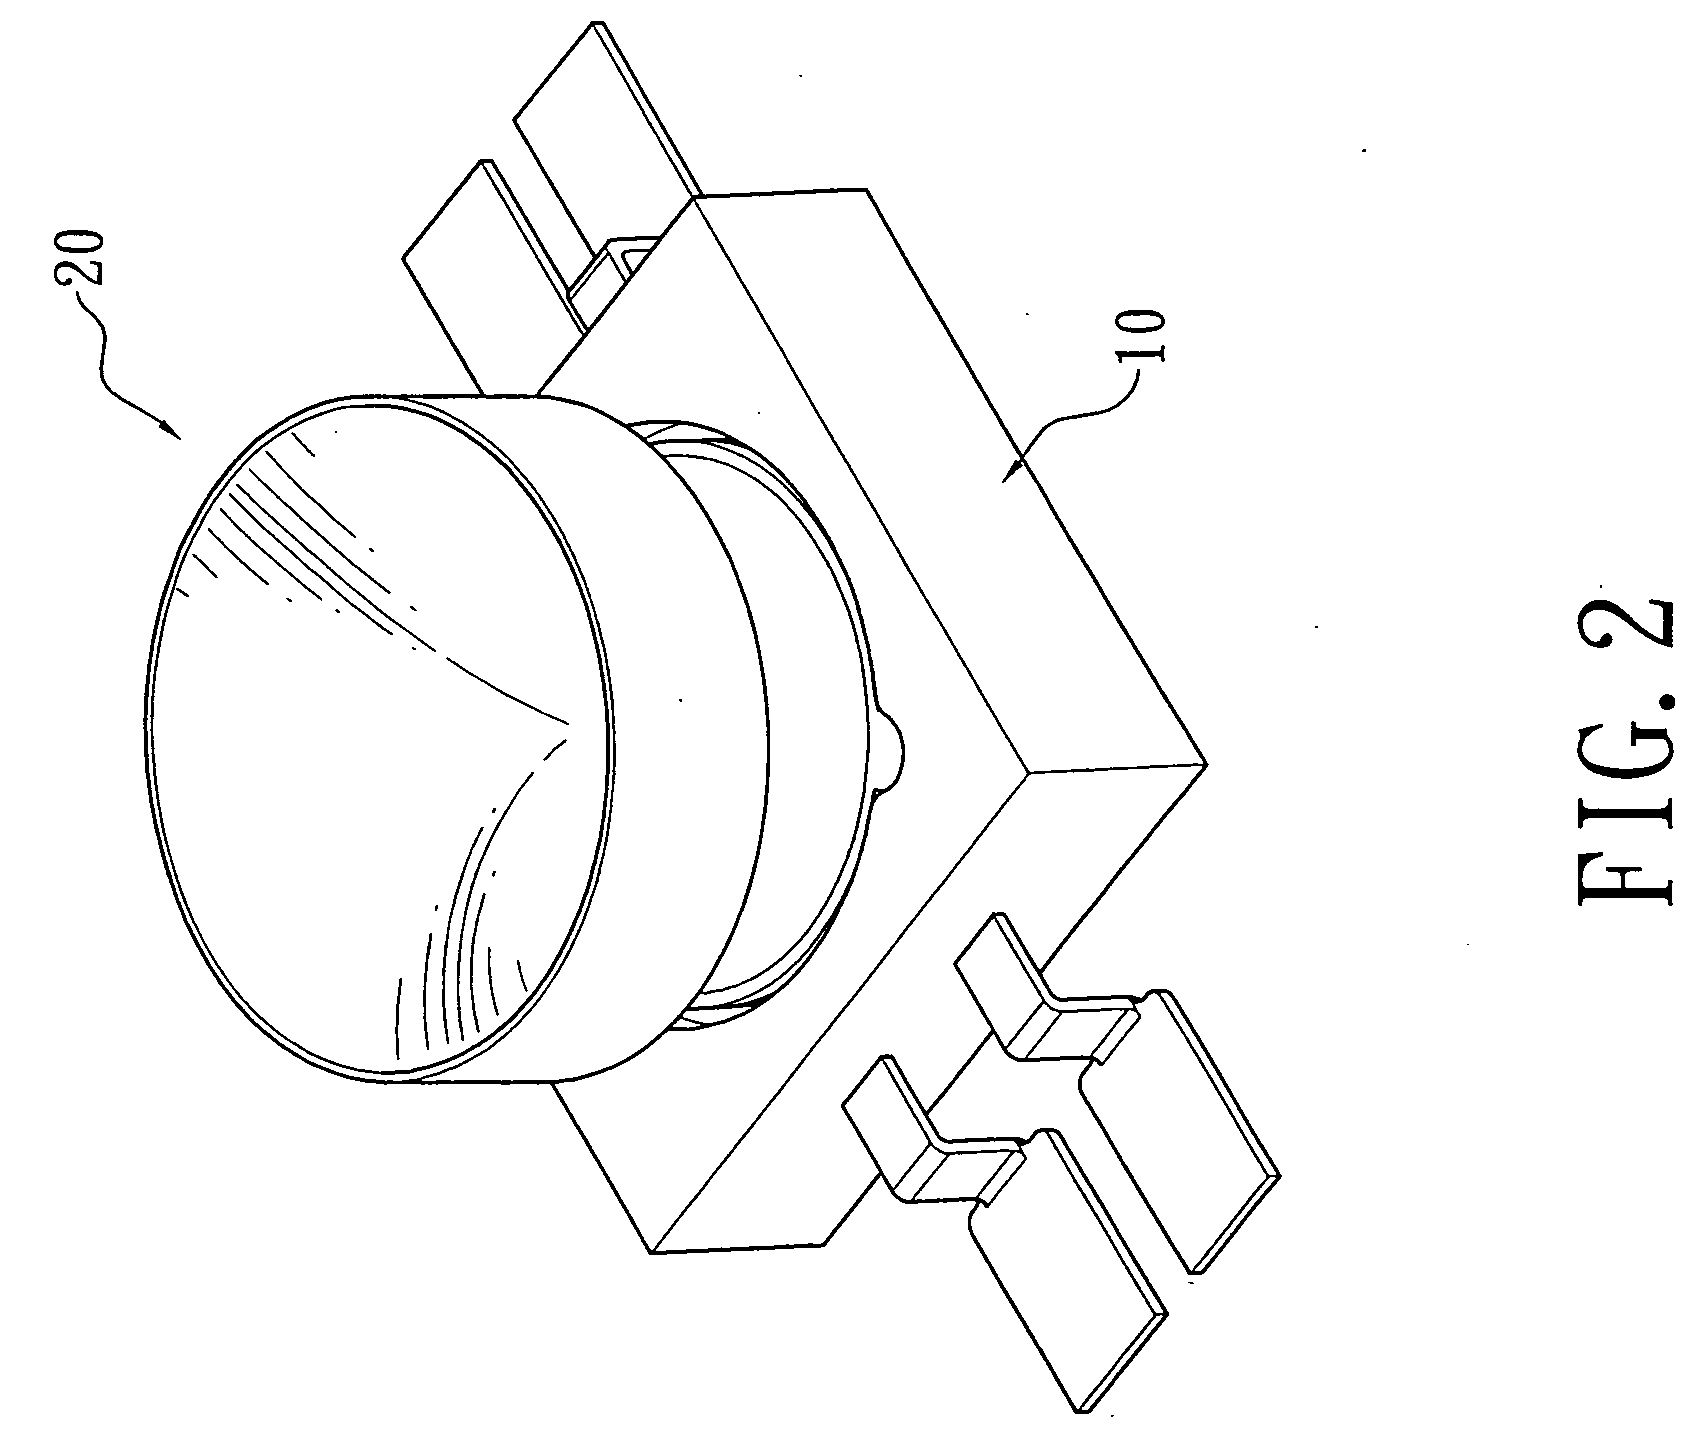 Side-emitting solid-state semiconductor light emitting device